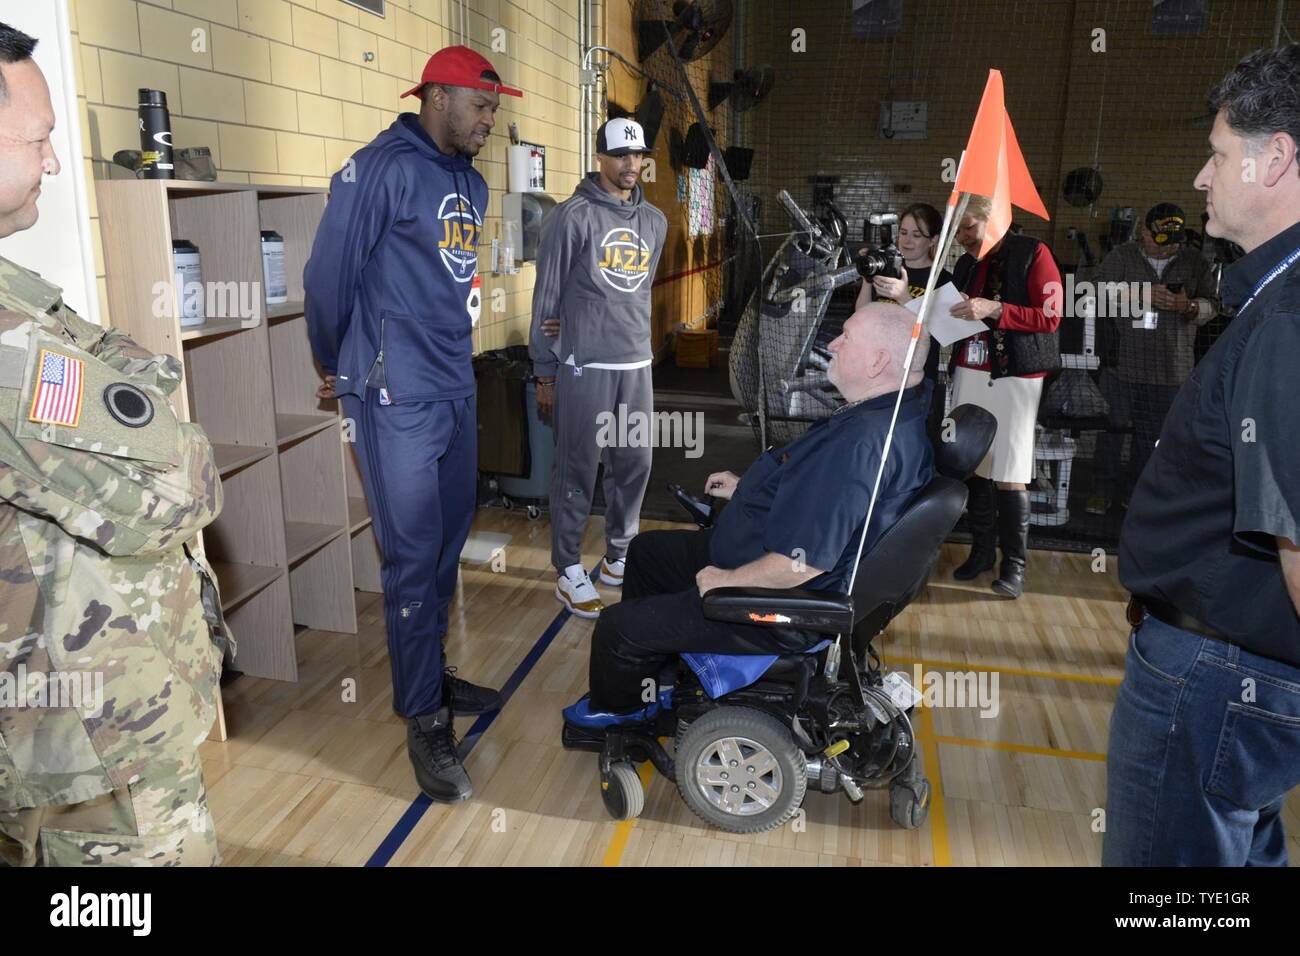 Utah Jazz players Derrick Favors and George Hill visit with a veteran at the newly remodeled gymnasium at the George E. Whalen Veterans Affairs Medical Center in Salt Lake City during the annual NBA/Department of Defemnse service project called ‘Commitment to Service,’ Thursday, Nov. 3, 2016. Stock Photo